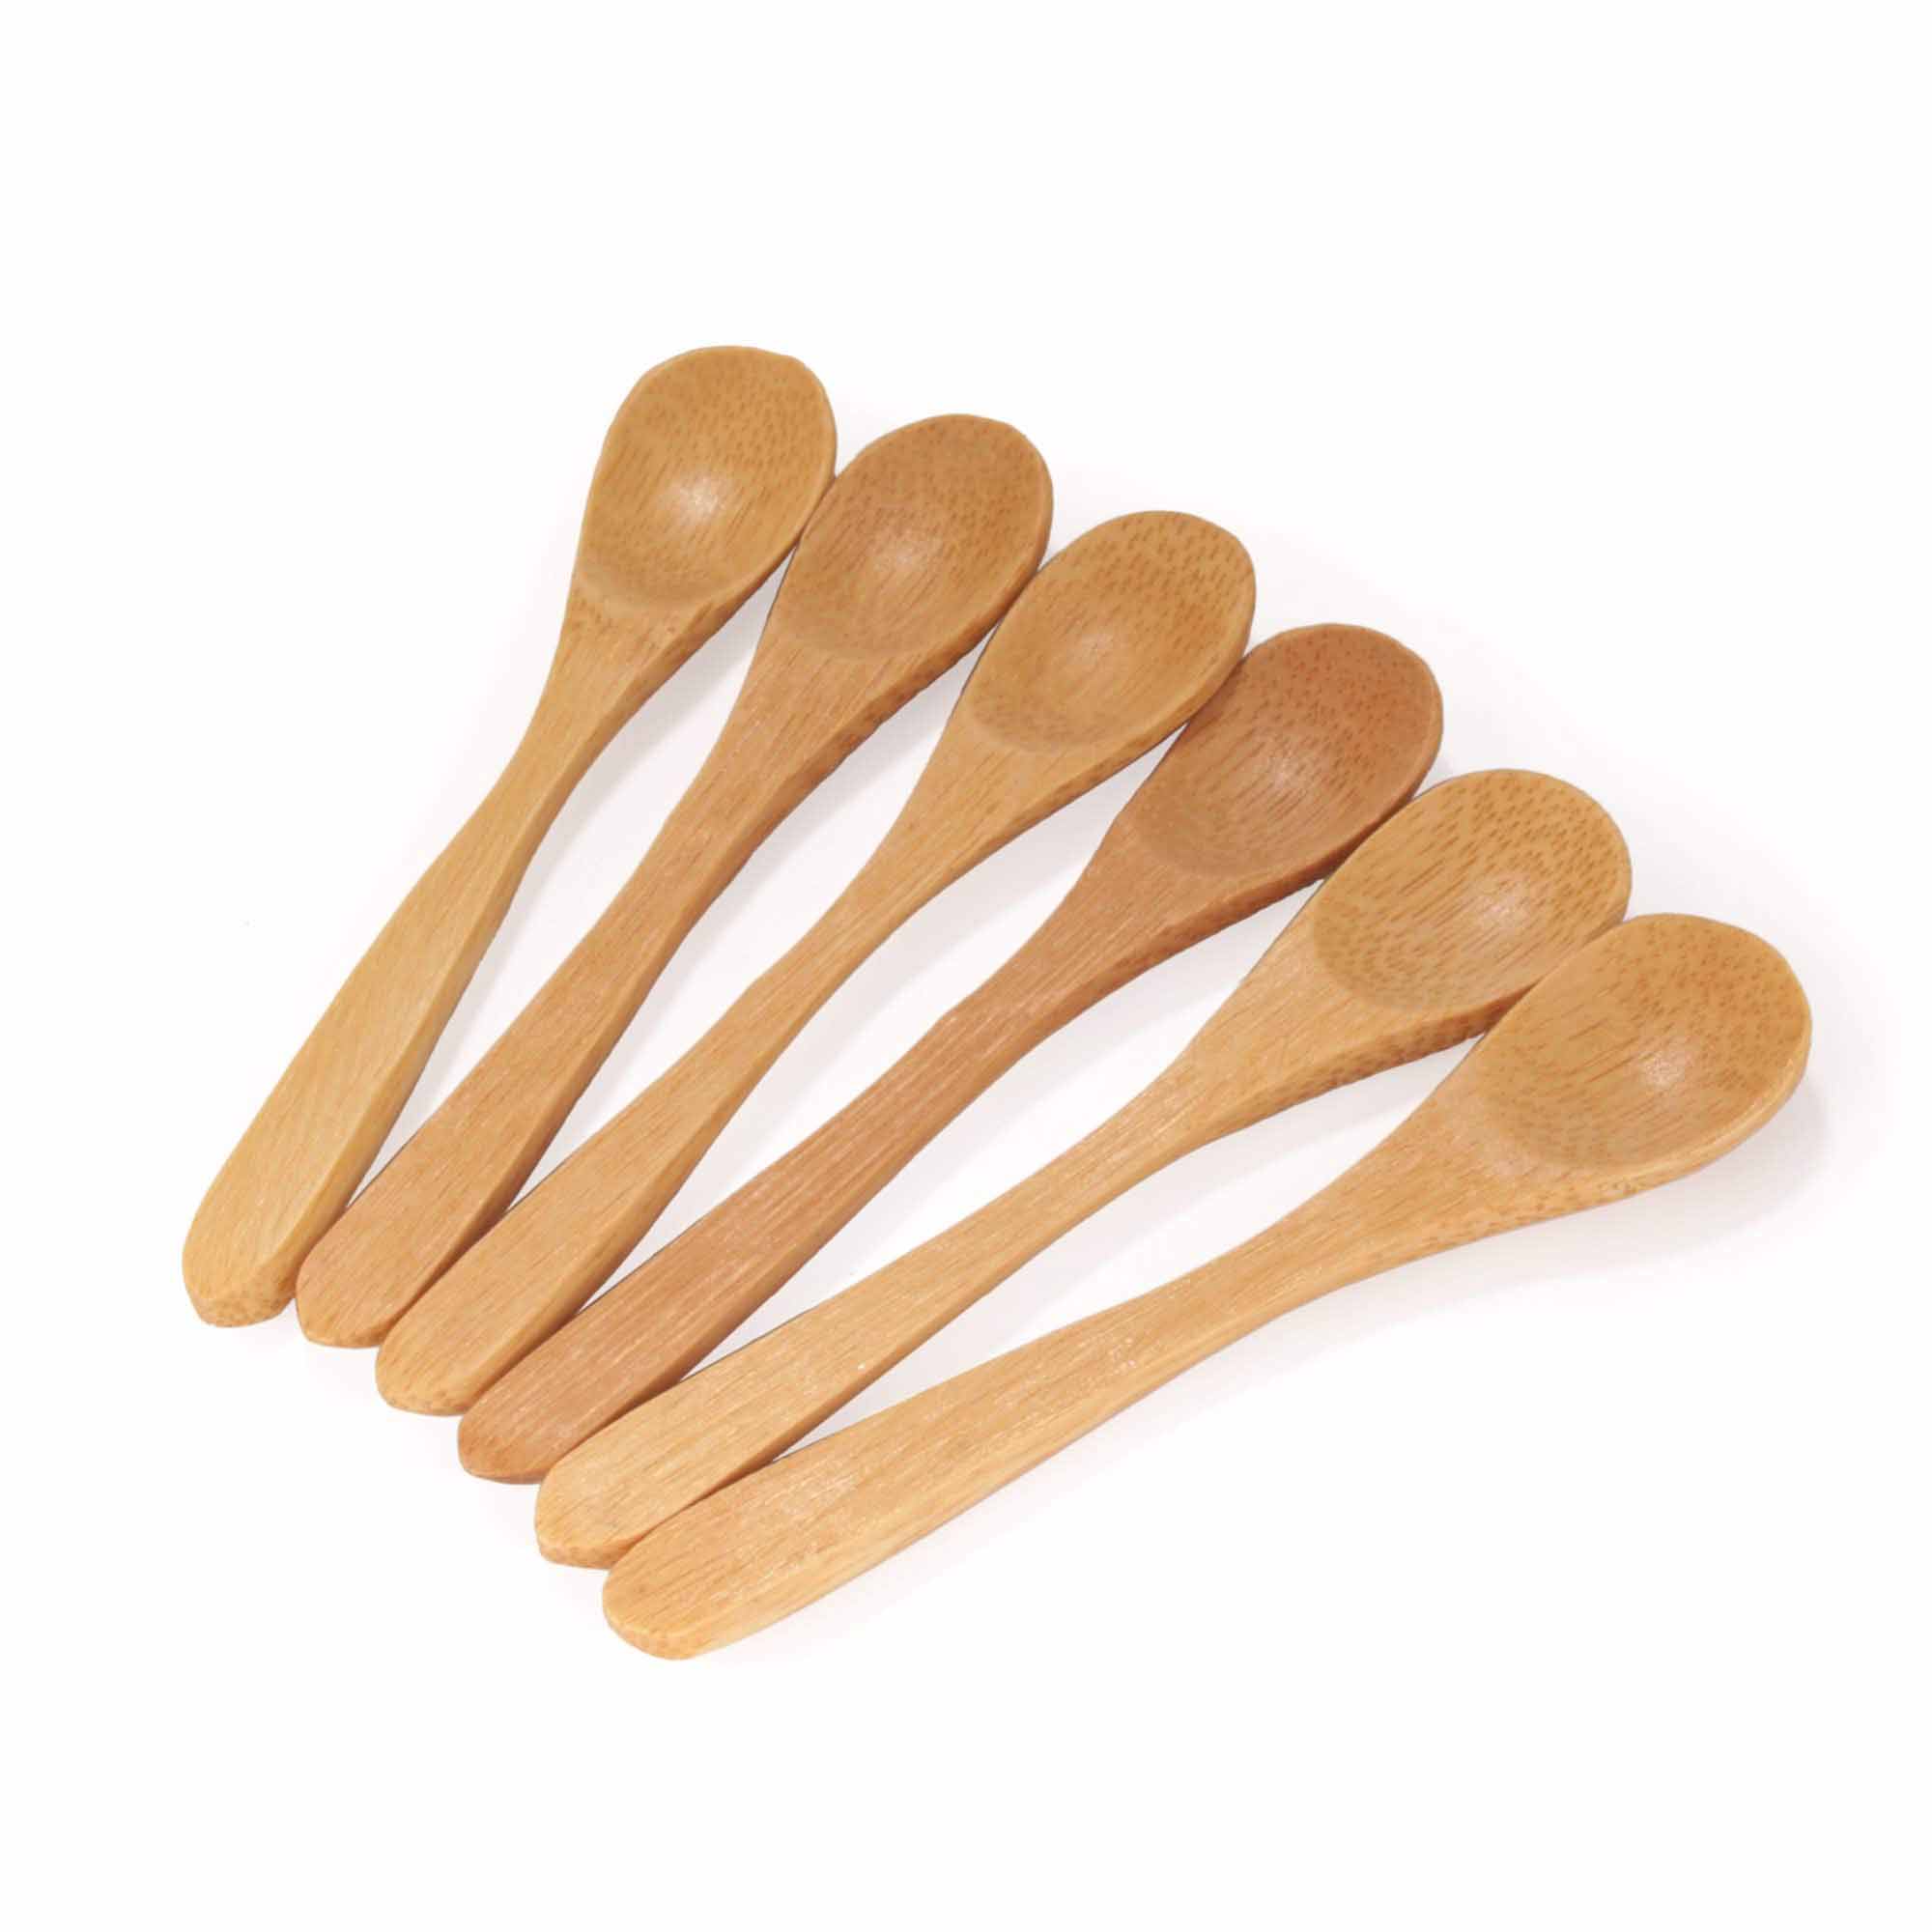 BambooMN Bamboo Spoons, Mini Salt Spoon/Tiny Wooden Spoons for Spices,  30pcs Black Oval 3.5